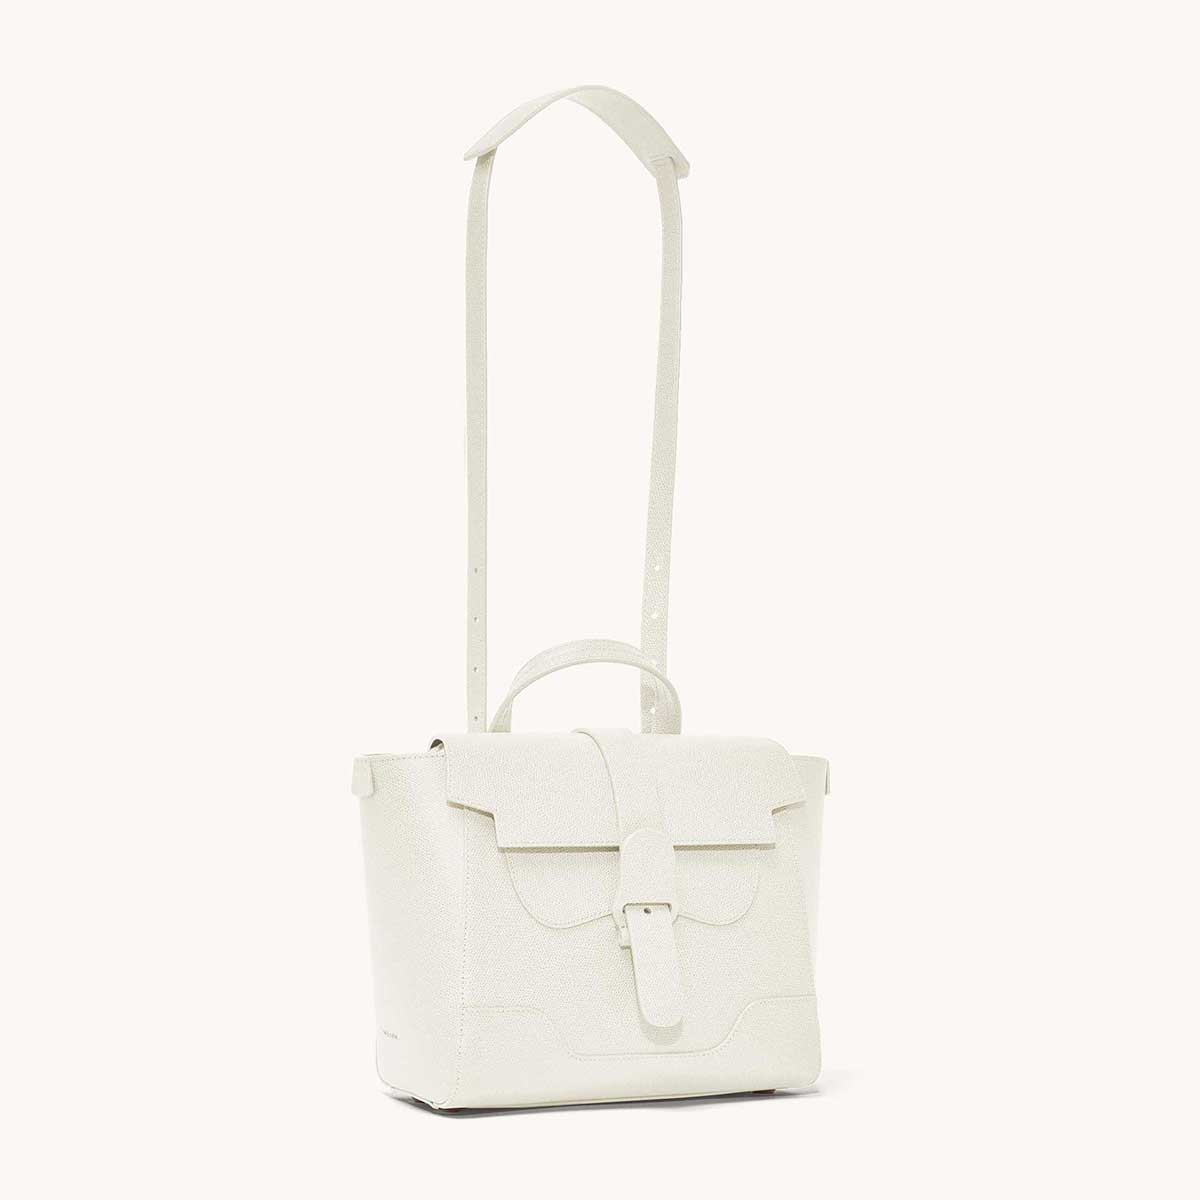 Midi Maestra Bag Pebbled Cream with Silver Hardware Front View with Long Strap